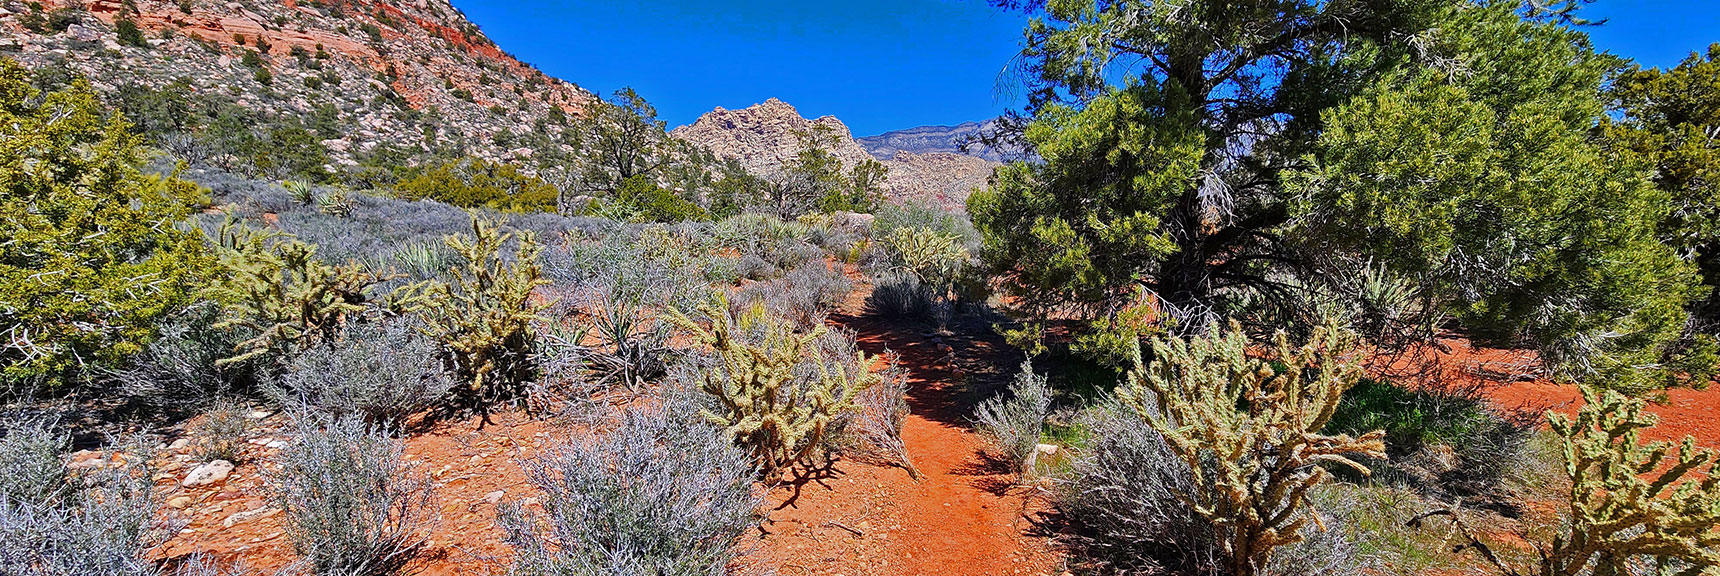 Colors are Amazing: Multiple Greens, Blue Sky, Reddish Soil. | Dales Trail | Red Rock Canyon National Conservation Area, Nevada | David Smith | LasVegasAreaTrails.com